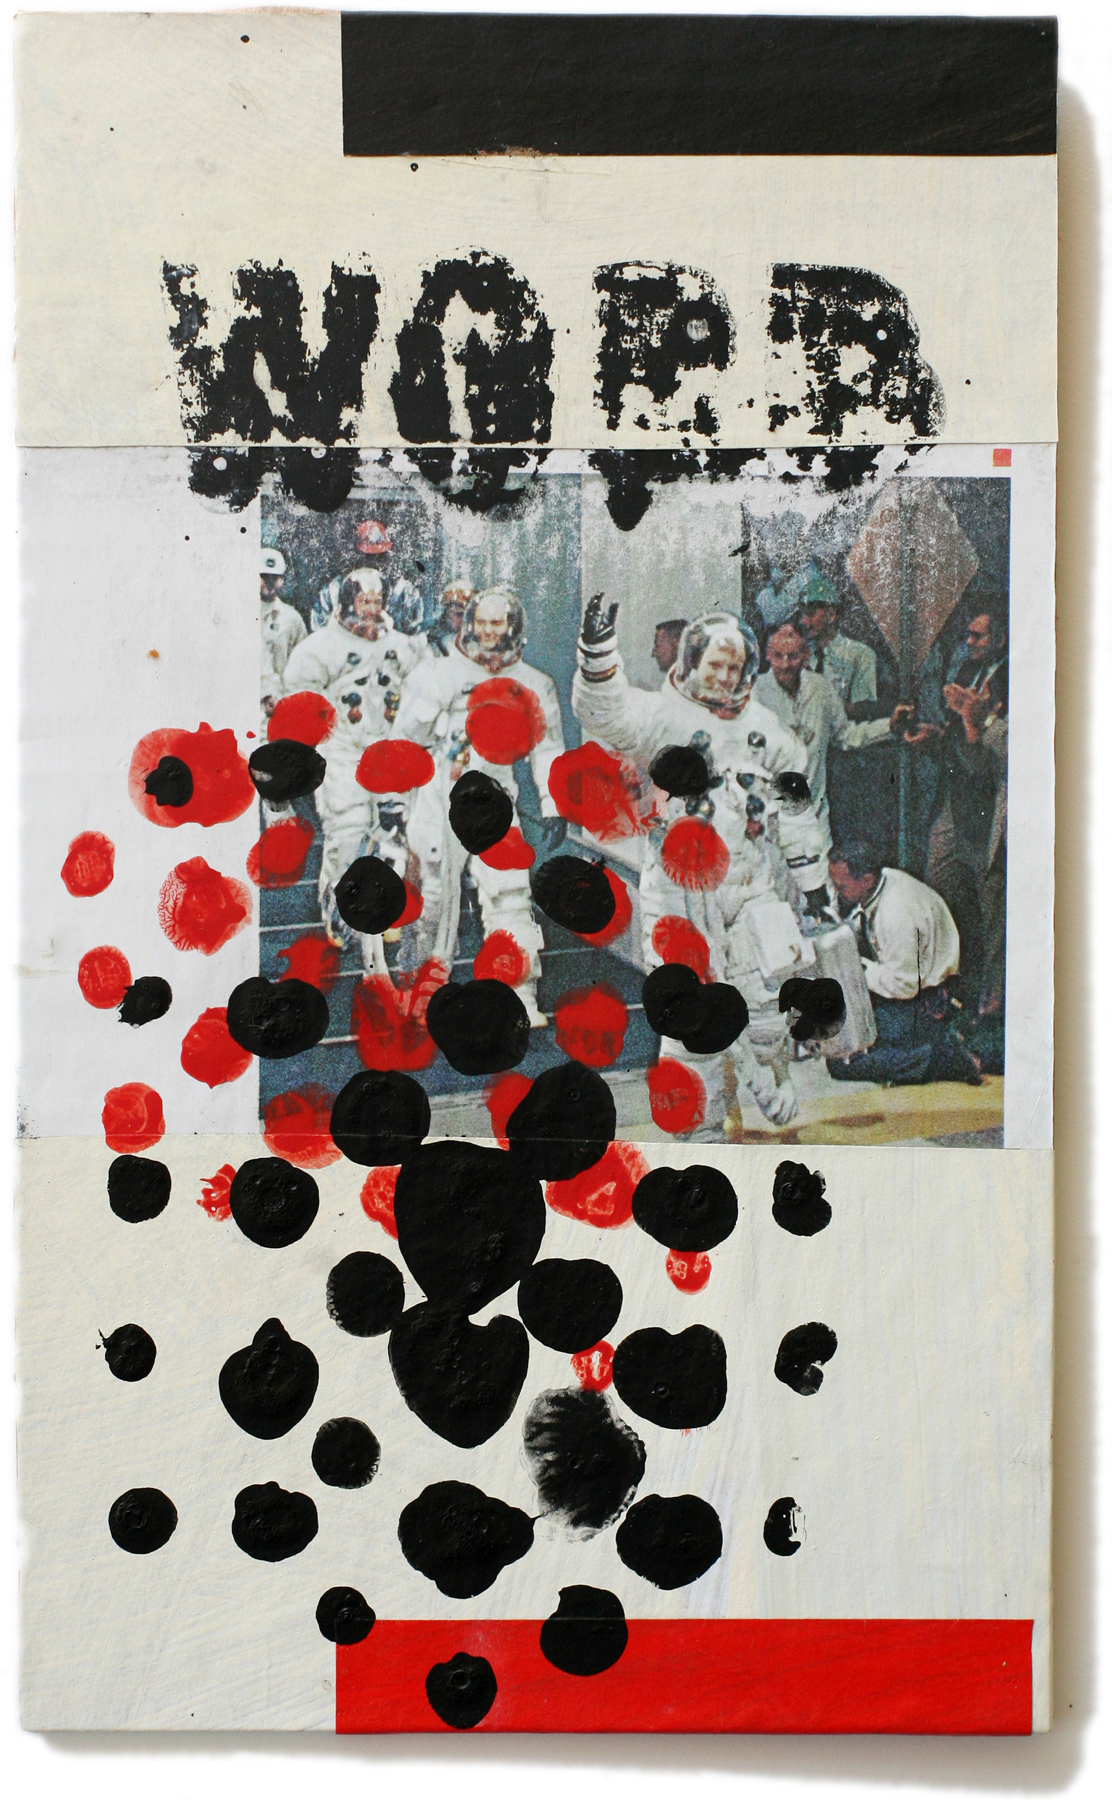 Word, 10" x 6", 2014 (private collection)